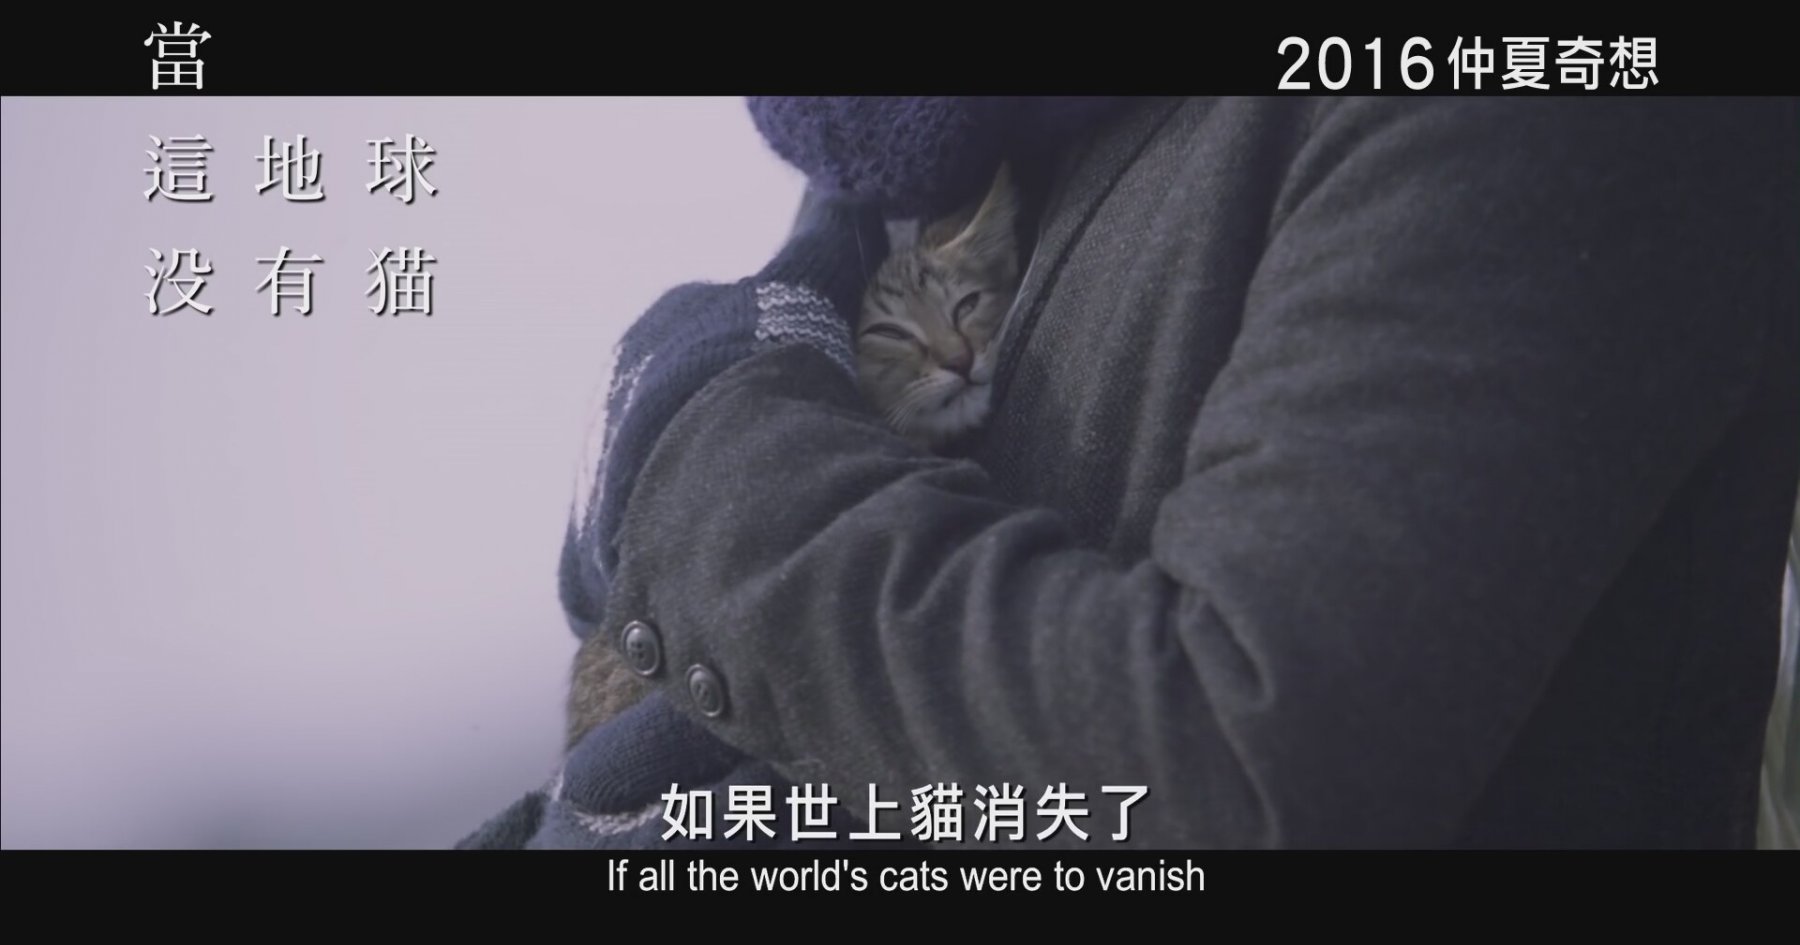 if cats disappeared from the world a novel